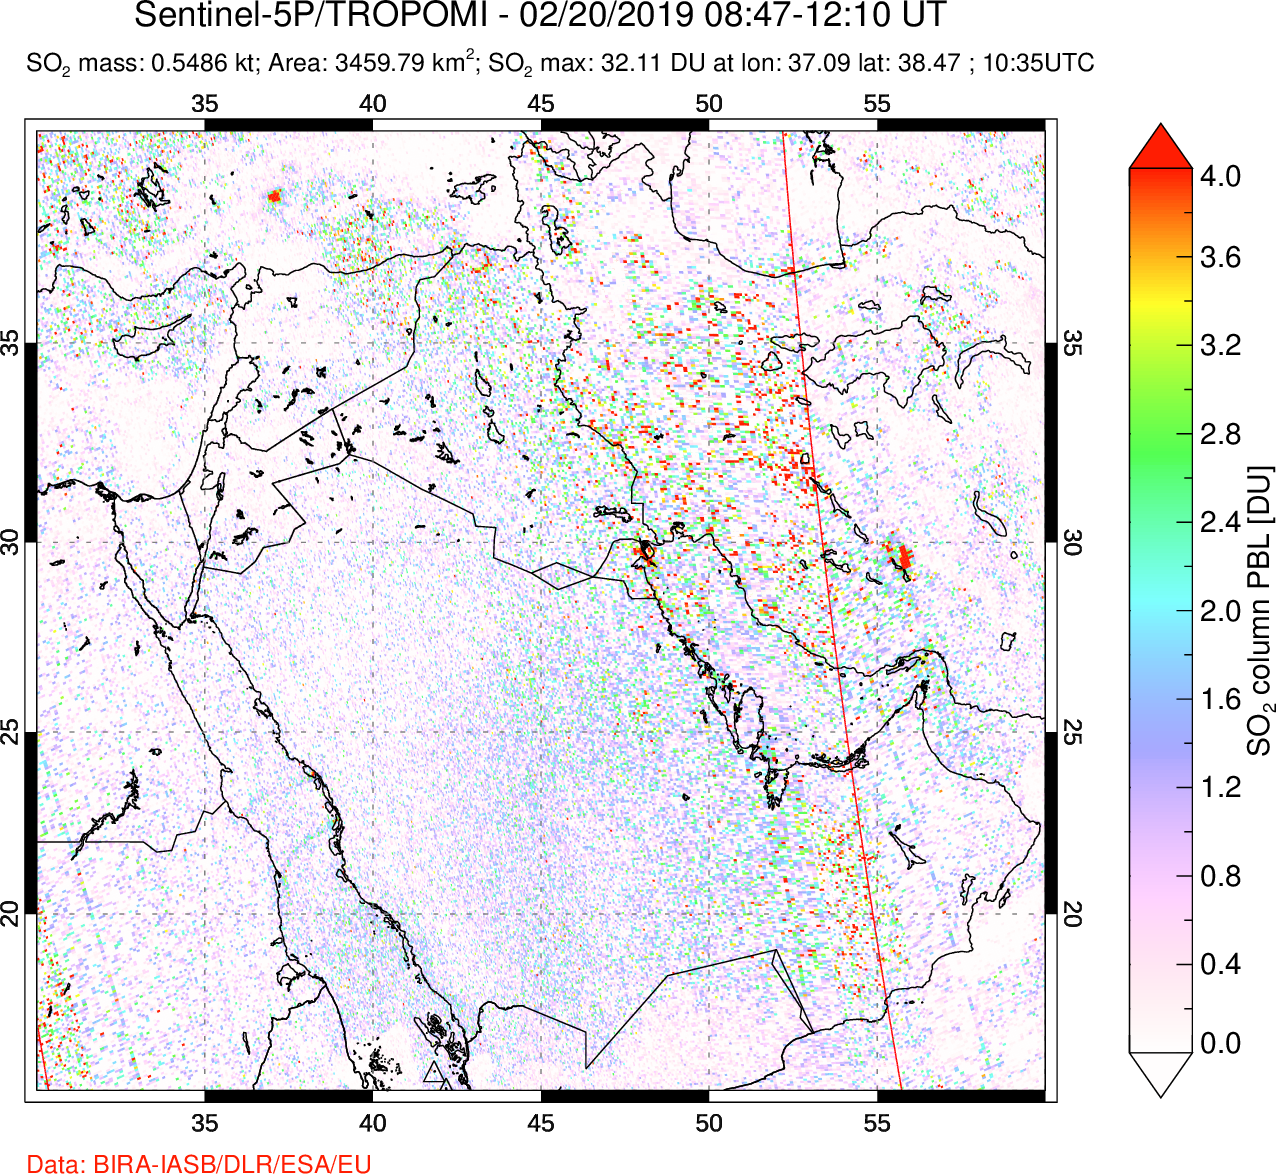 A sulfur dioxide image over Middle East on Feb 20, 2019.